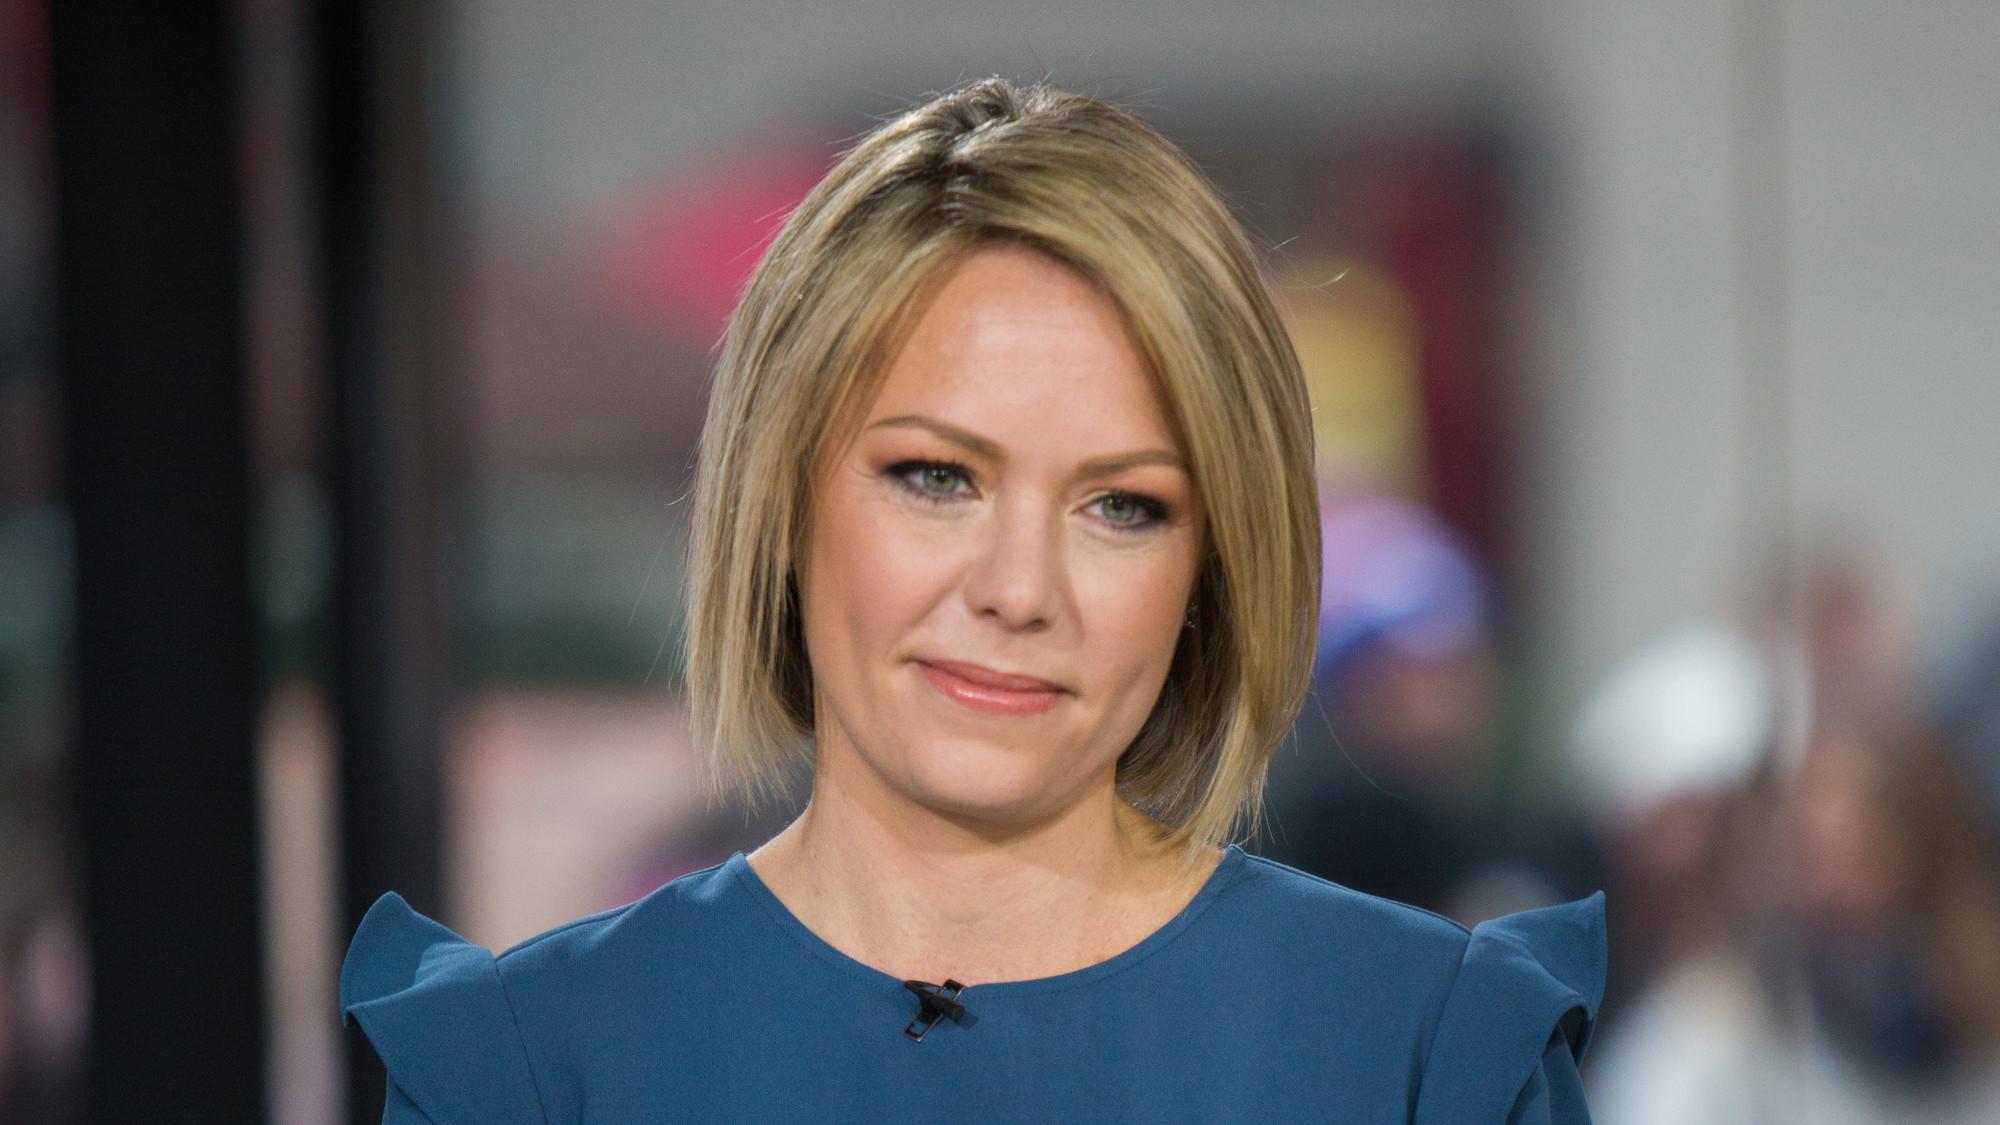 Dylan Dreyer Reveals Struggle With Miscarriage and Infertility: Video.